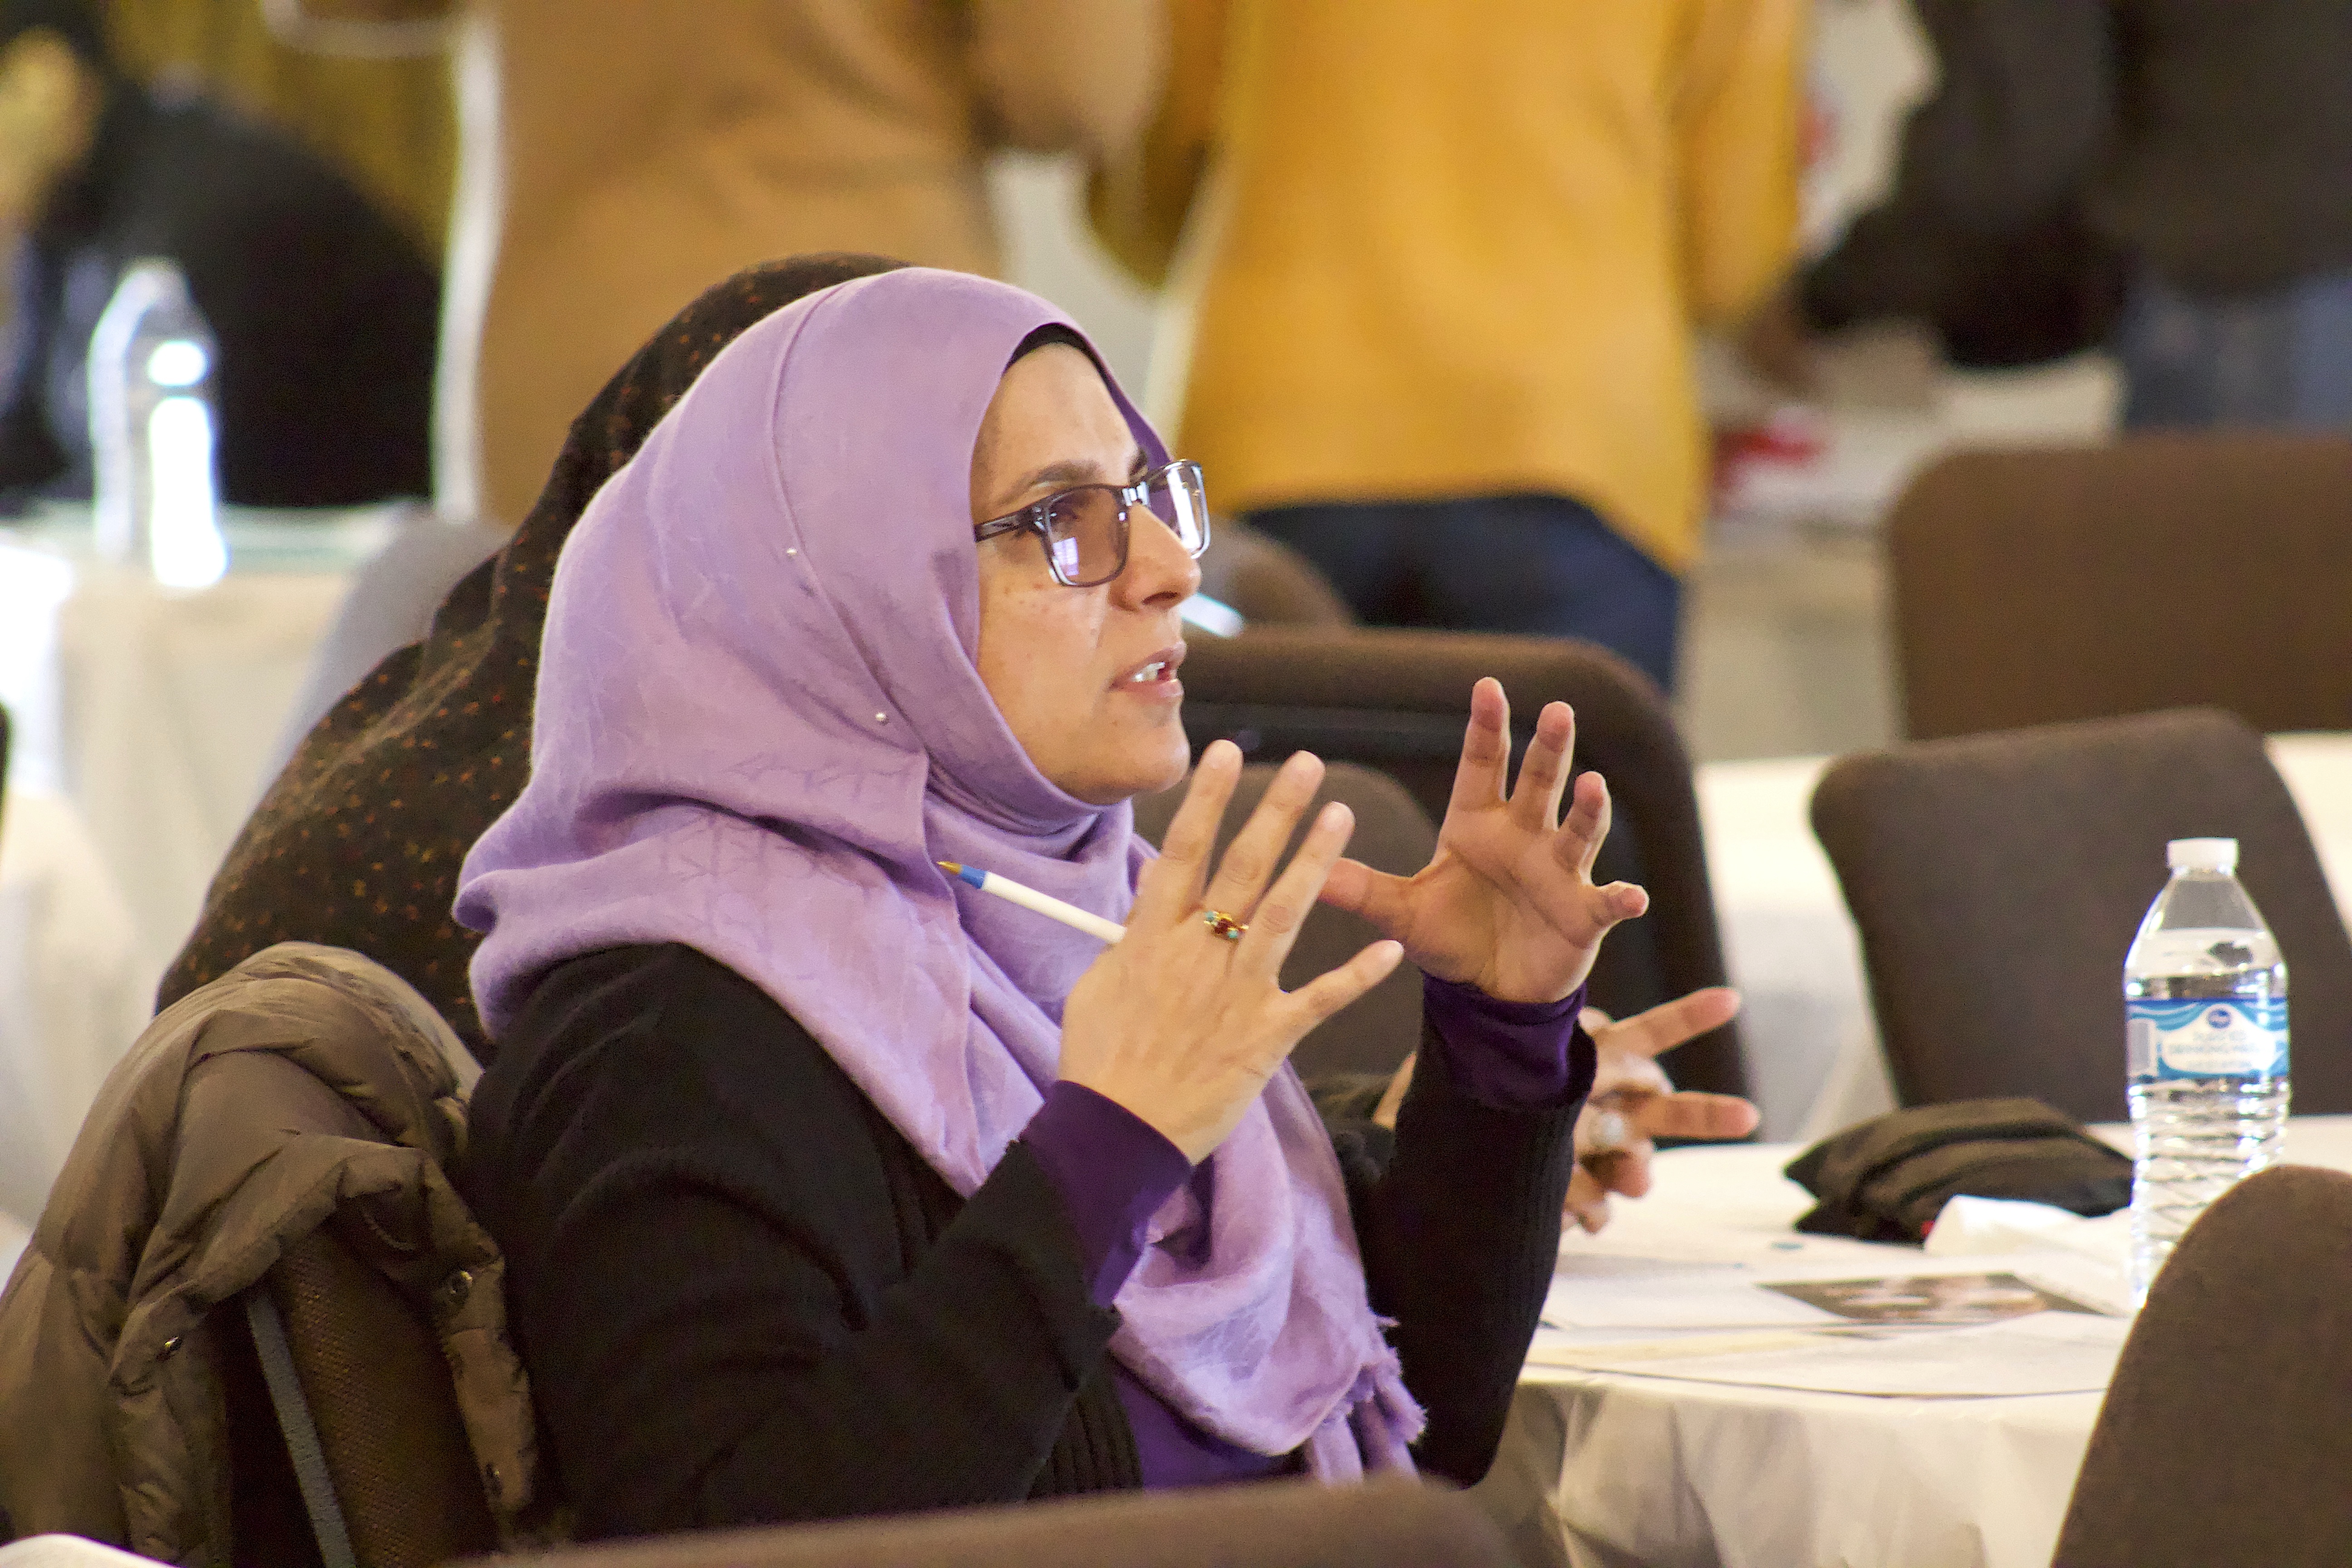 A community member asks questions regarding Alzheimer's and related dementias at a MCCFAD community event in Dearborn Heights. Photo: Hassan Abbas/The Arab American News